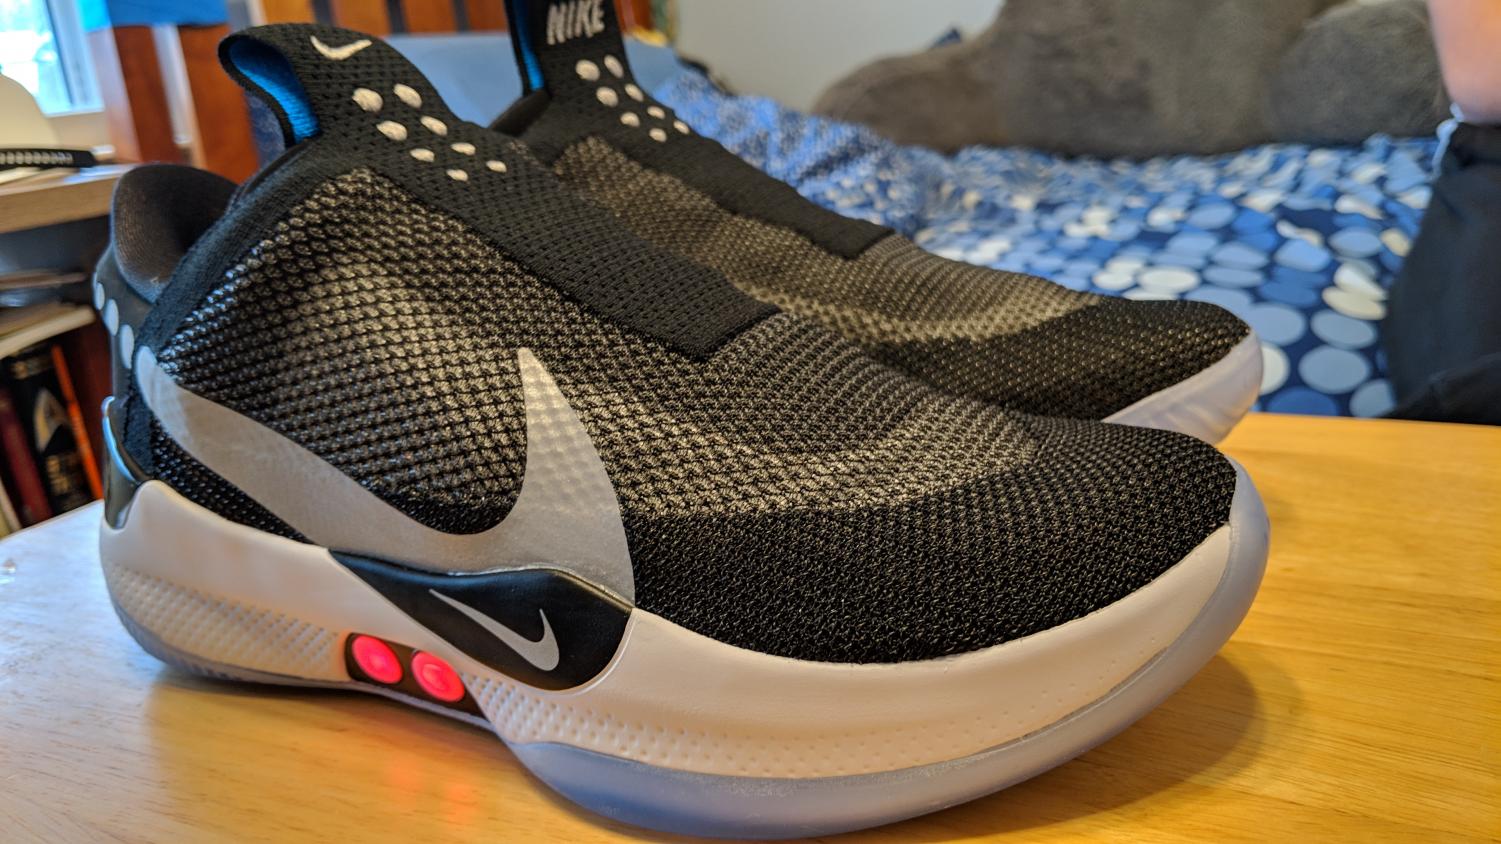 | Review: The Nike Adapt BB Self-Lacing Shoes